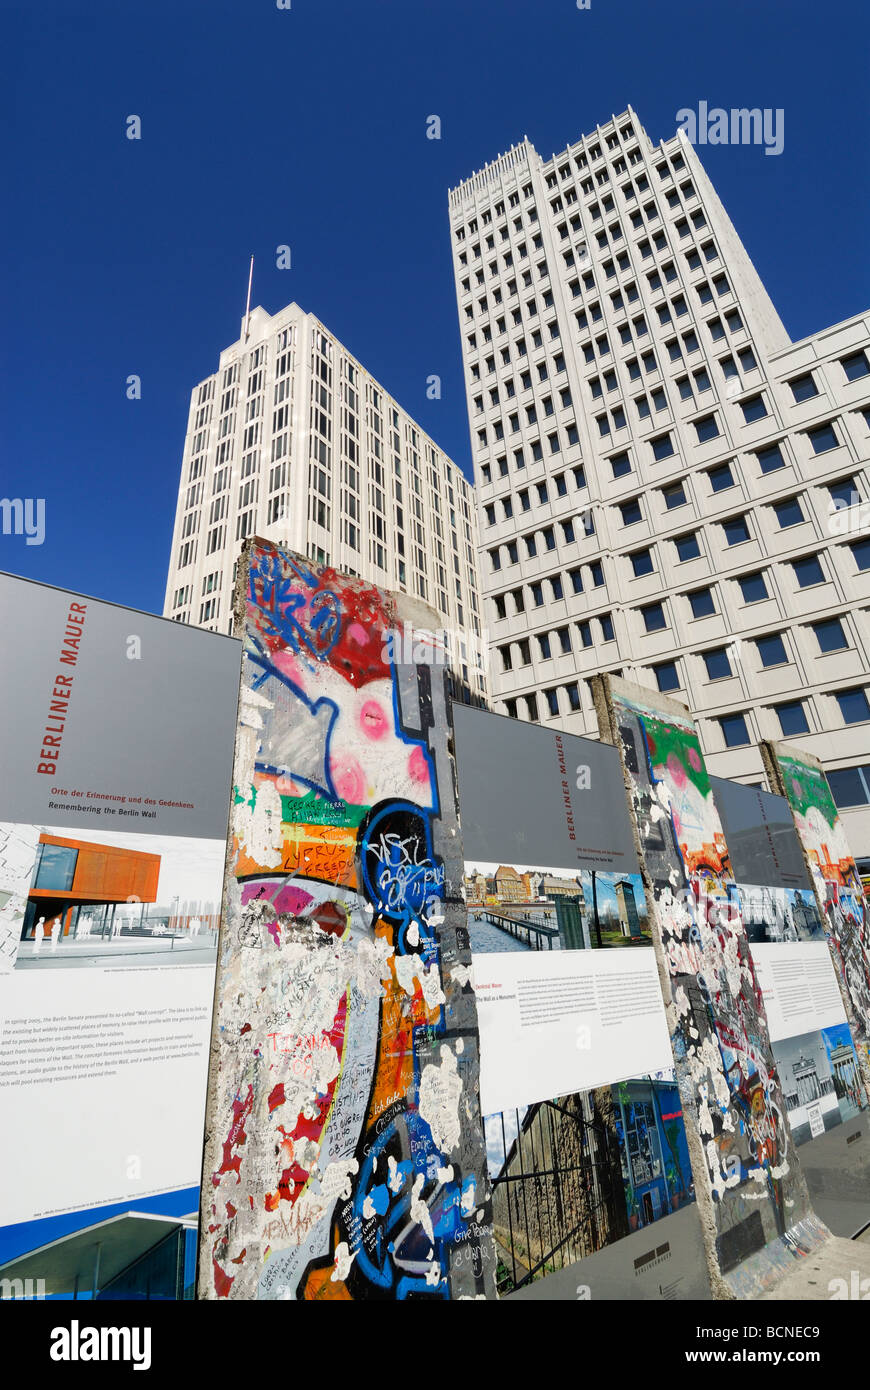 Berlin Germany Exhibition on Potsdamer Platz commemorating 20 years since the fall of the Berlin wall Stock Photo